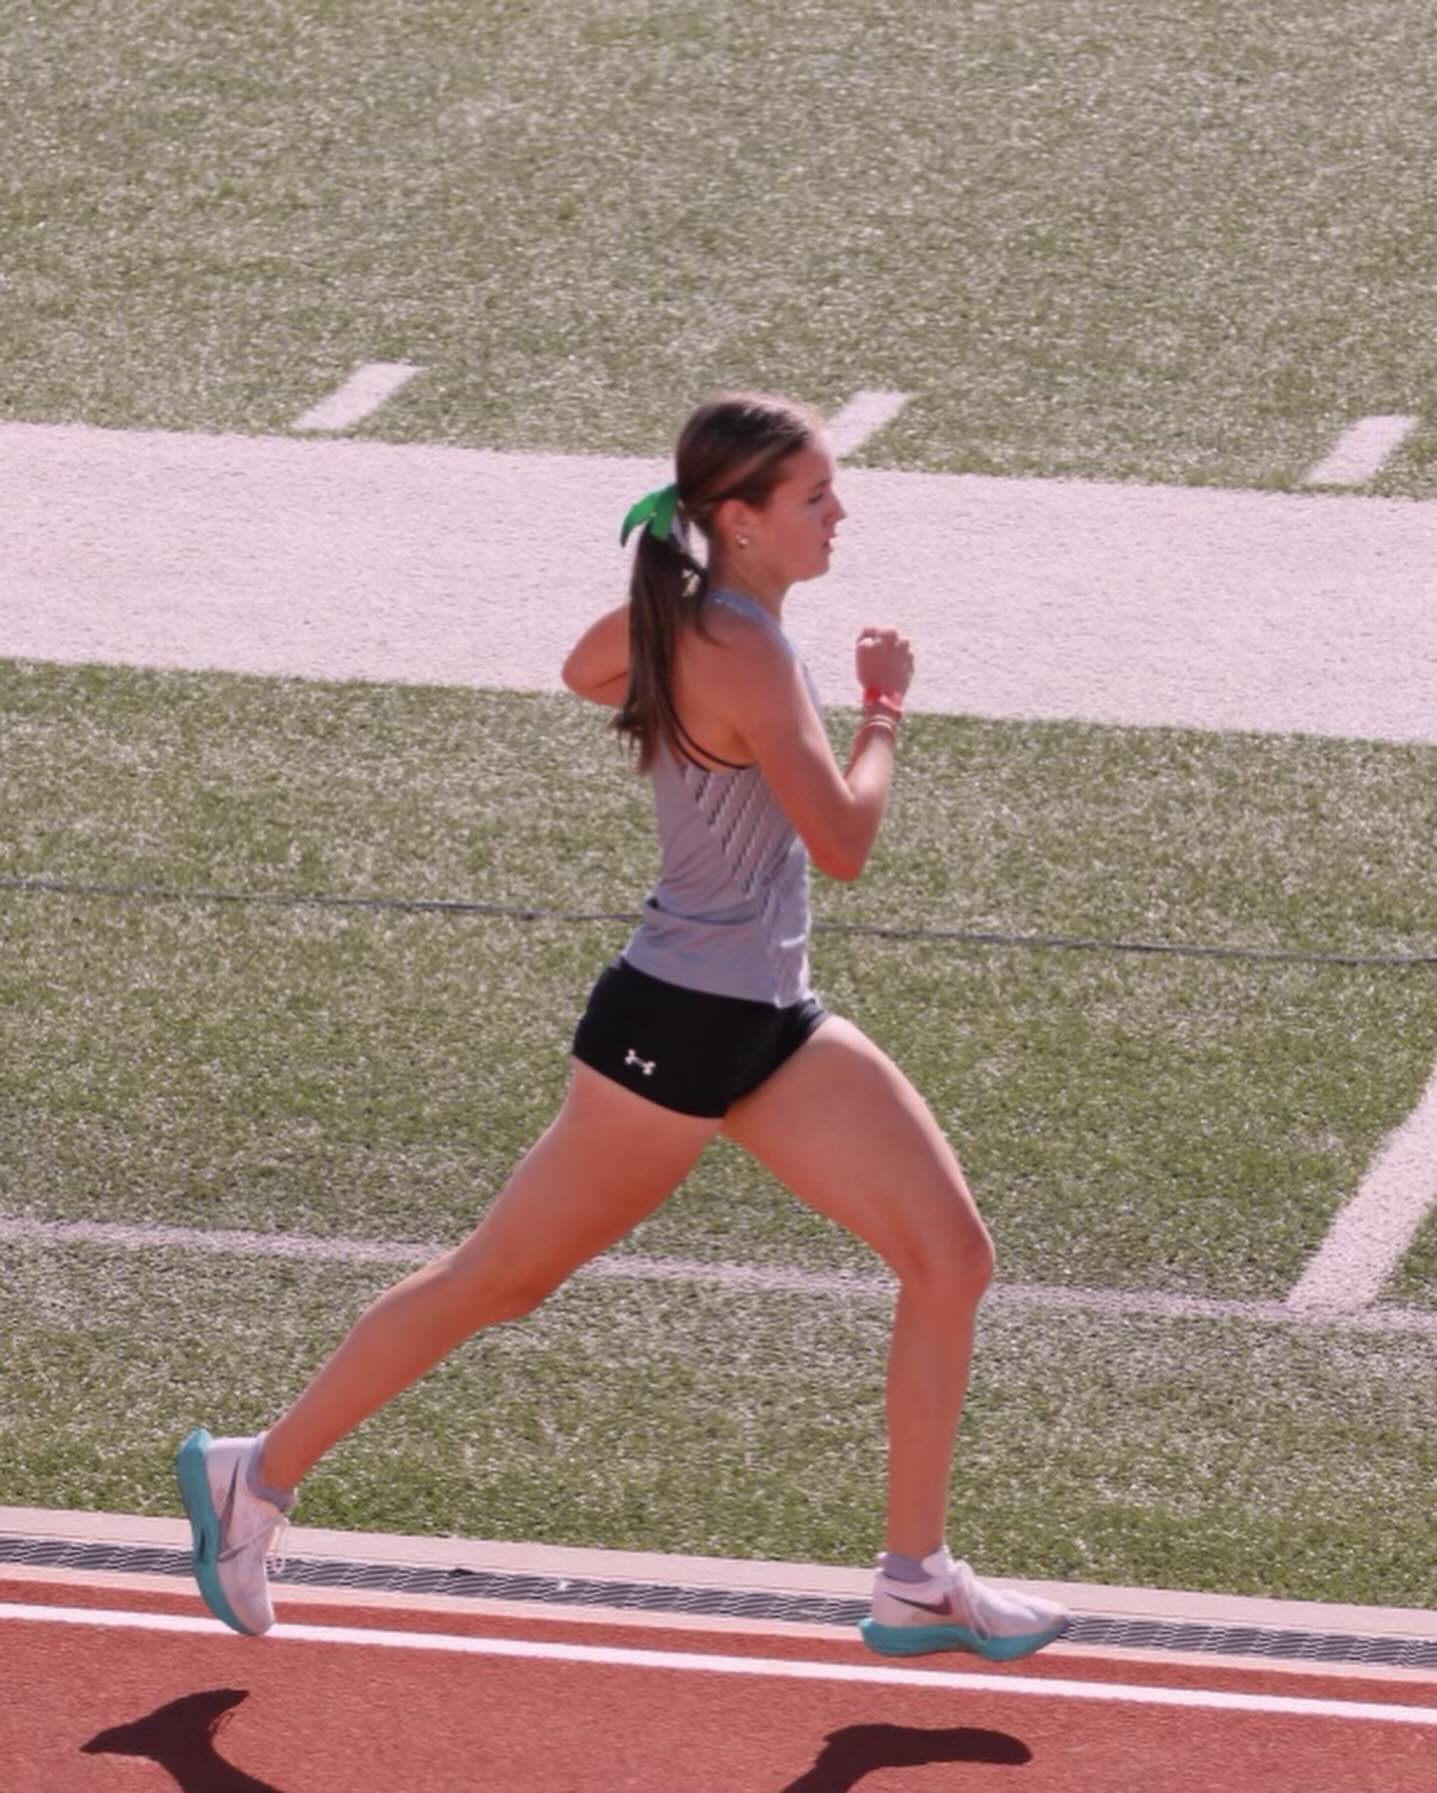 Kinley Kite finished an amazing senior track season this weekend at the 6A state track meet. 

⚡️3200 meter run - 4th place - 11:04
⚡️1600 meter run - 3rd place - 5:03

Thank you for trusting the process the last 2 years.